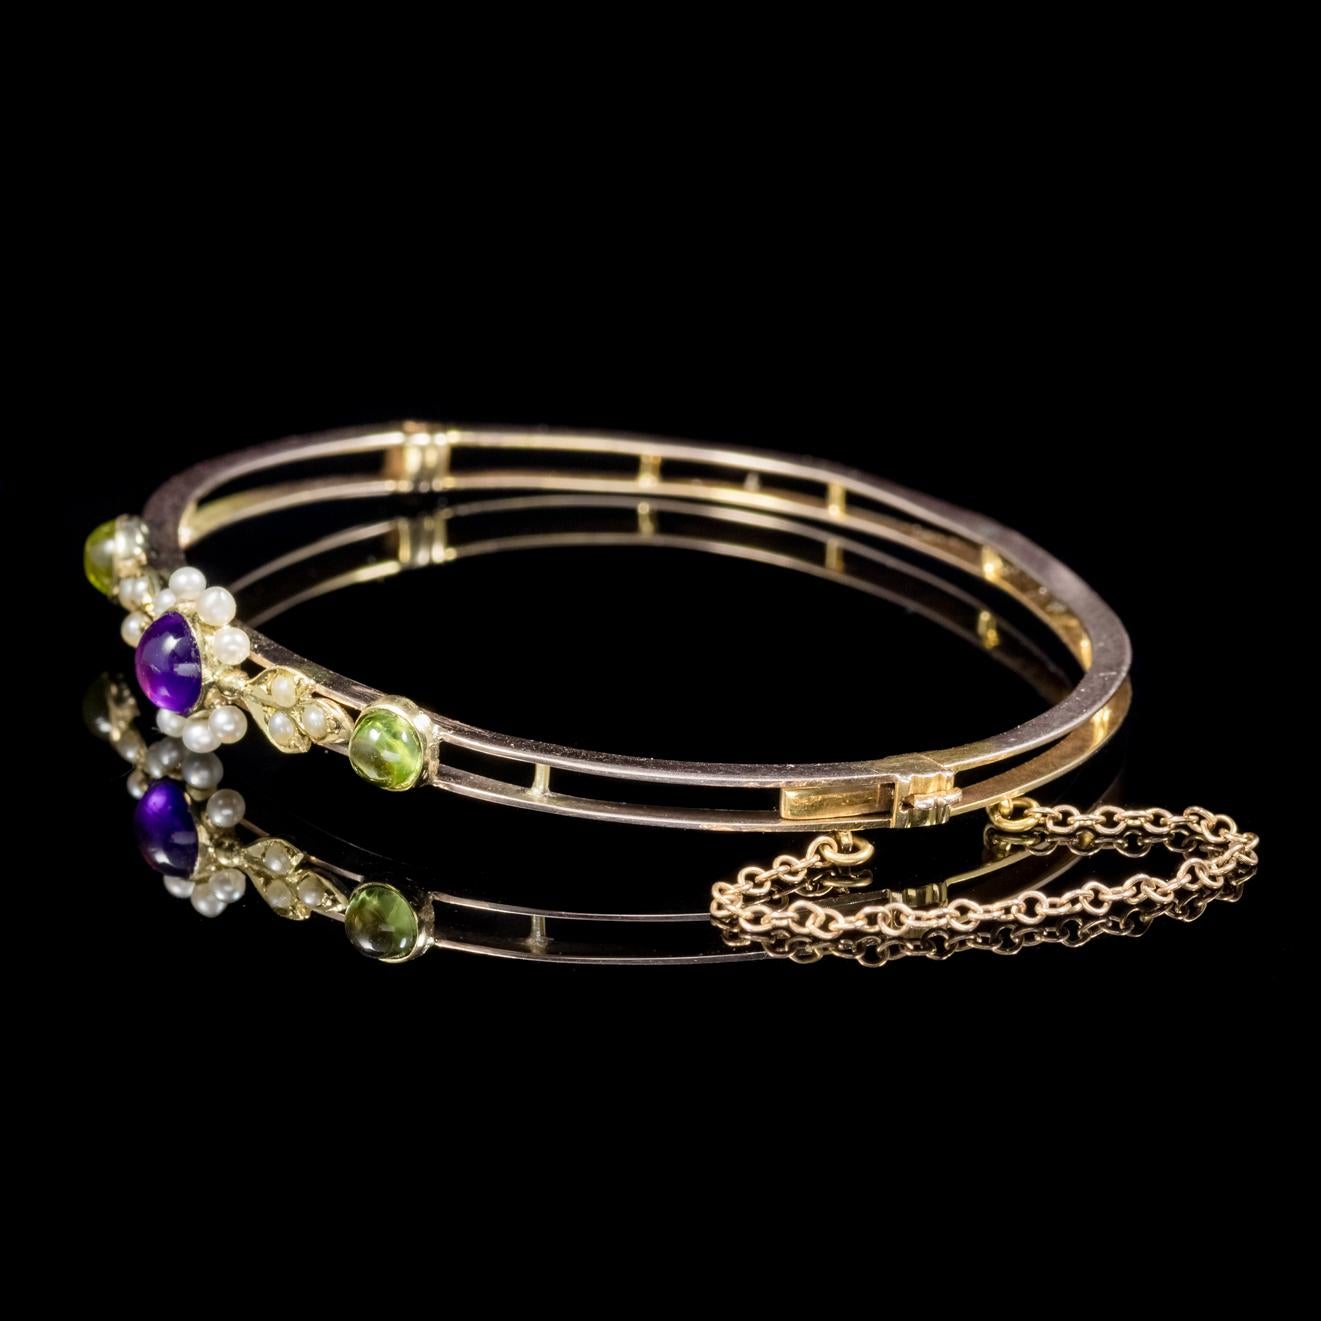 A lovely antique Victorian Suffragette bangle C. 1900, set with a violet 0.50ct cabochon Amethyst, two green 0.22ct cabochon Peridots and fourteen creamy white Pearls. 

Suffragettes liked to be depicted as feminine, their jewellery popularly